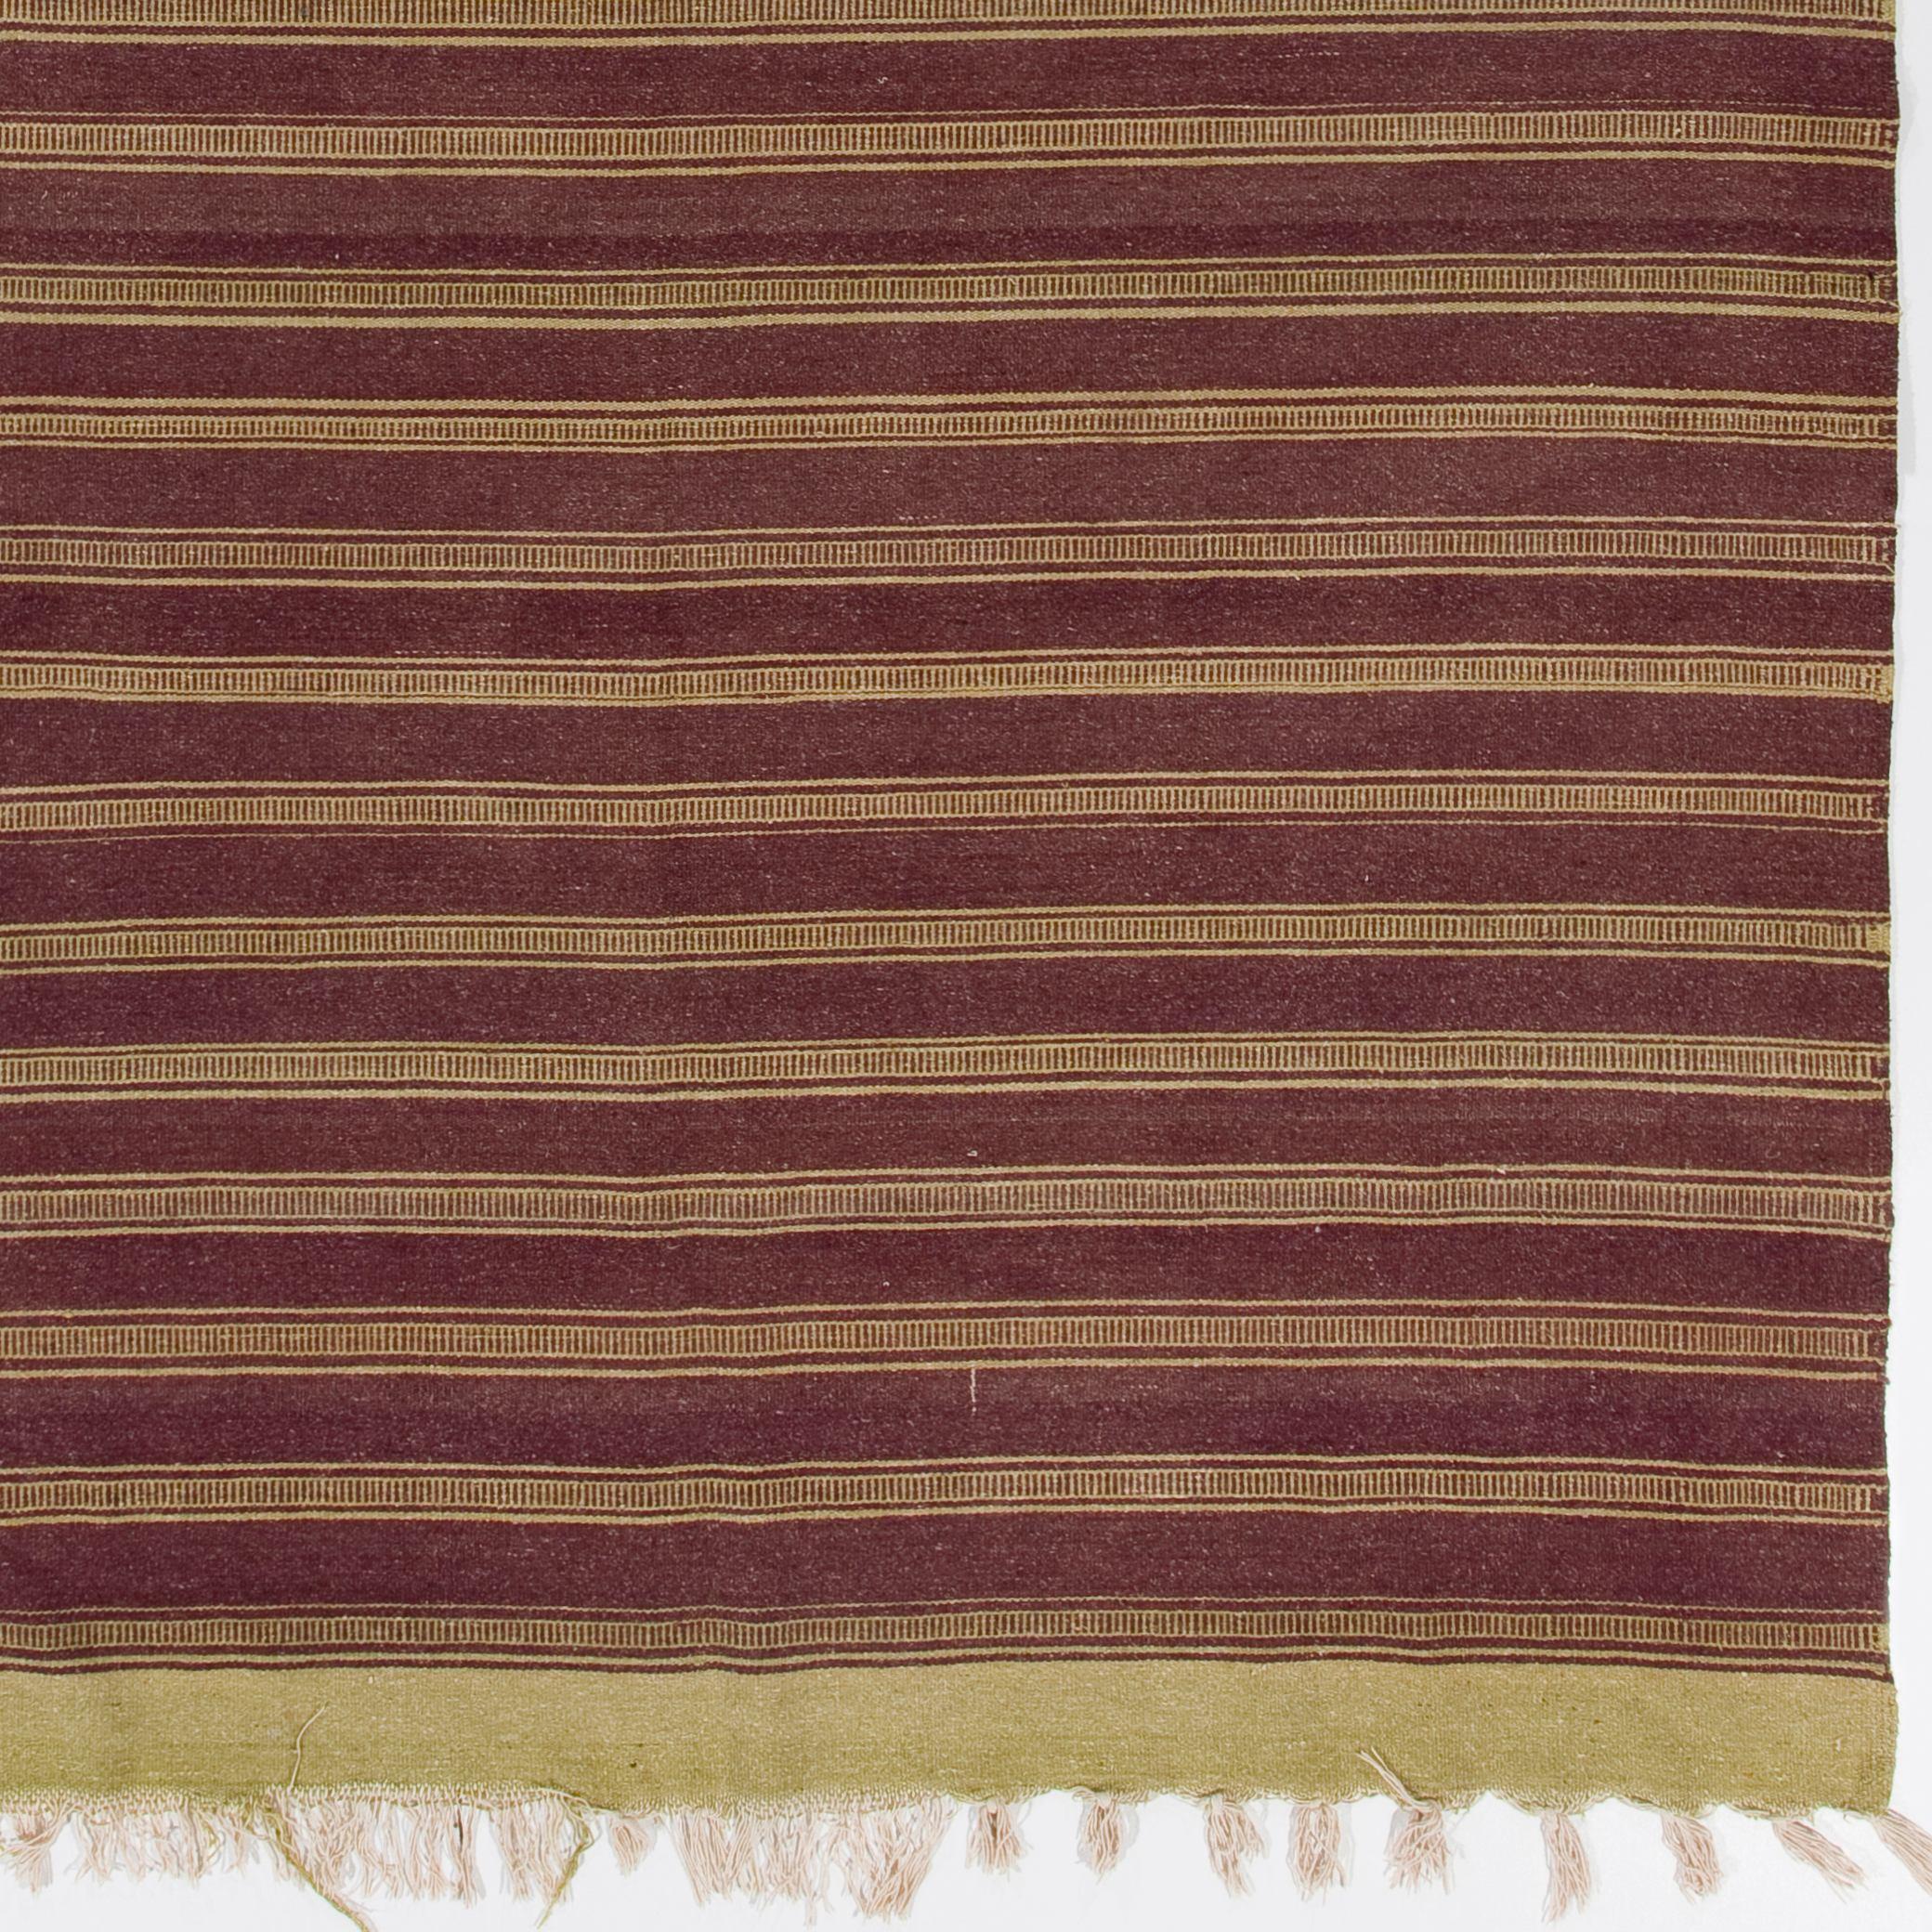 5.6x9 Ft Vintage Striped Handwoven Turkish Kilim 'Flat Weave', All Wool In Good Condition For Sale In Philadelphia, PA